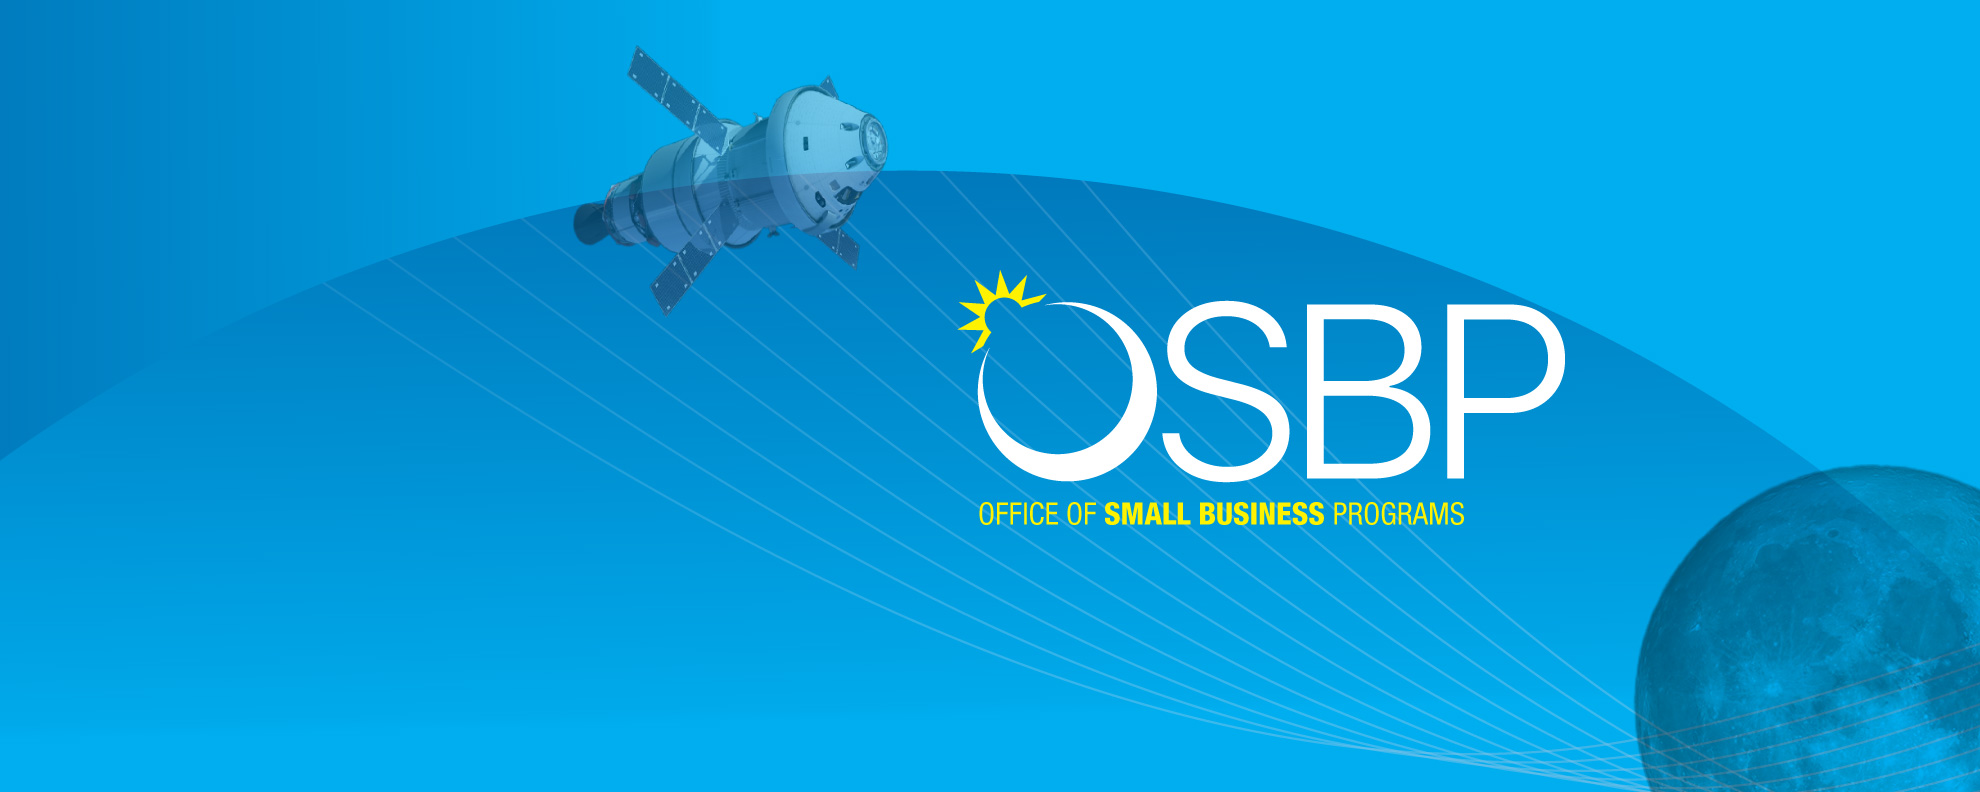 Office of Small Business blue web banner with Orion and moon